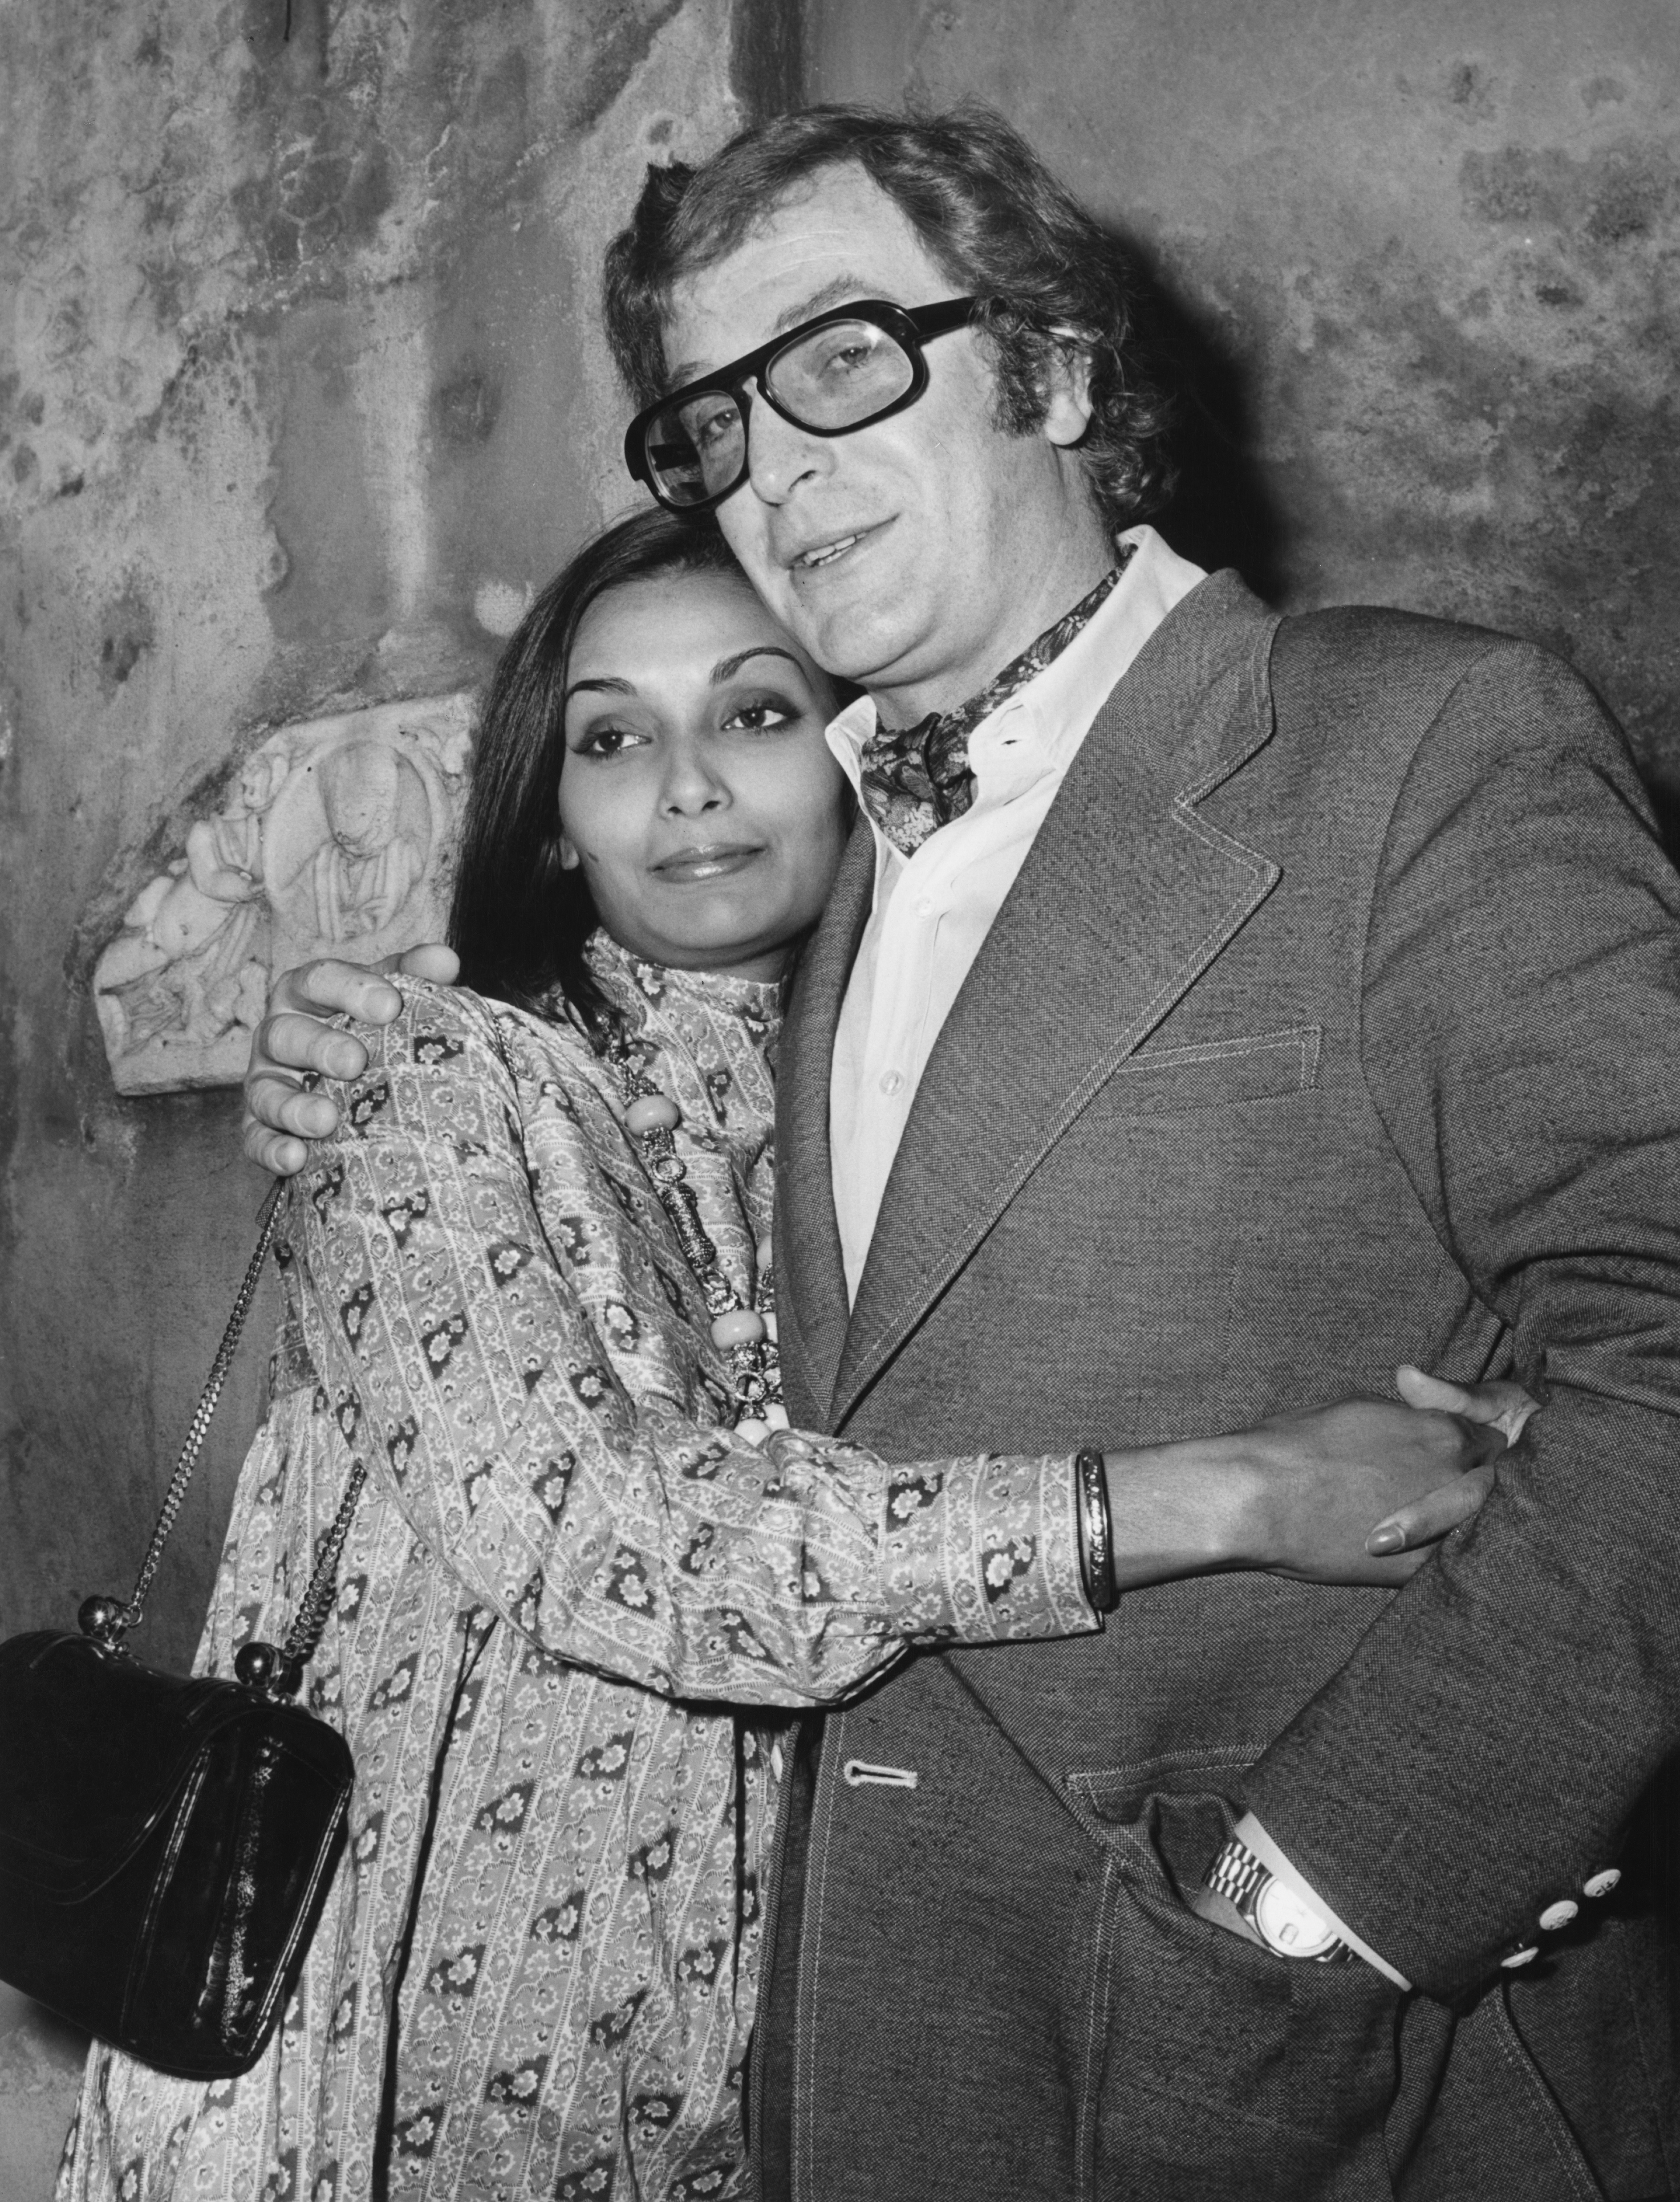 Michael Caine and Shakira Caine on January 1, 1972 in Rome, Italy. | Source: Getty Images